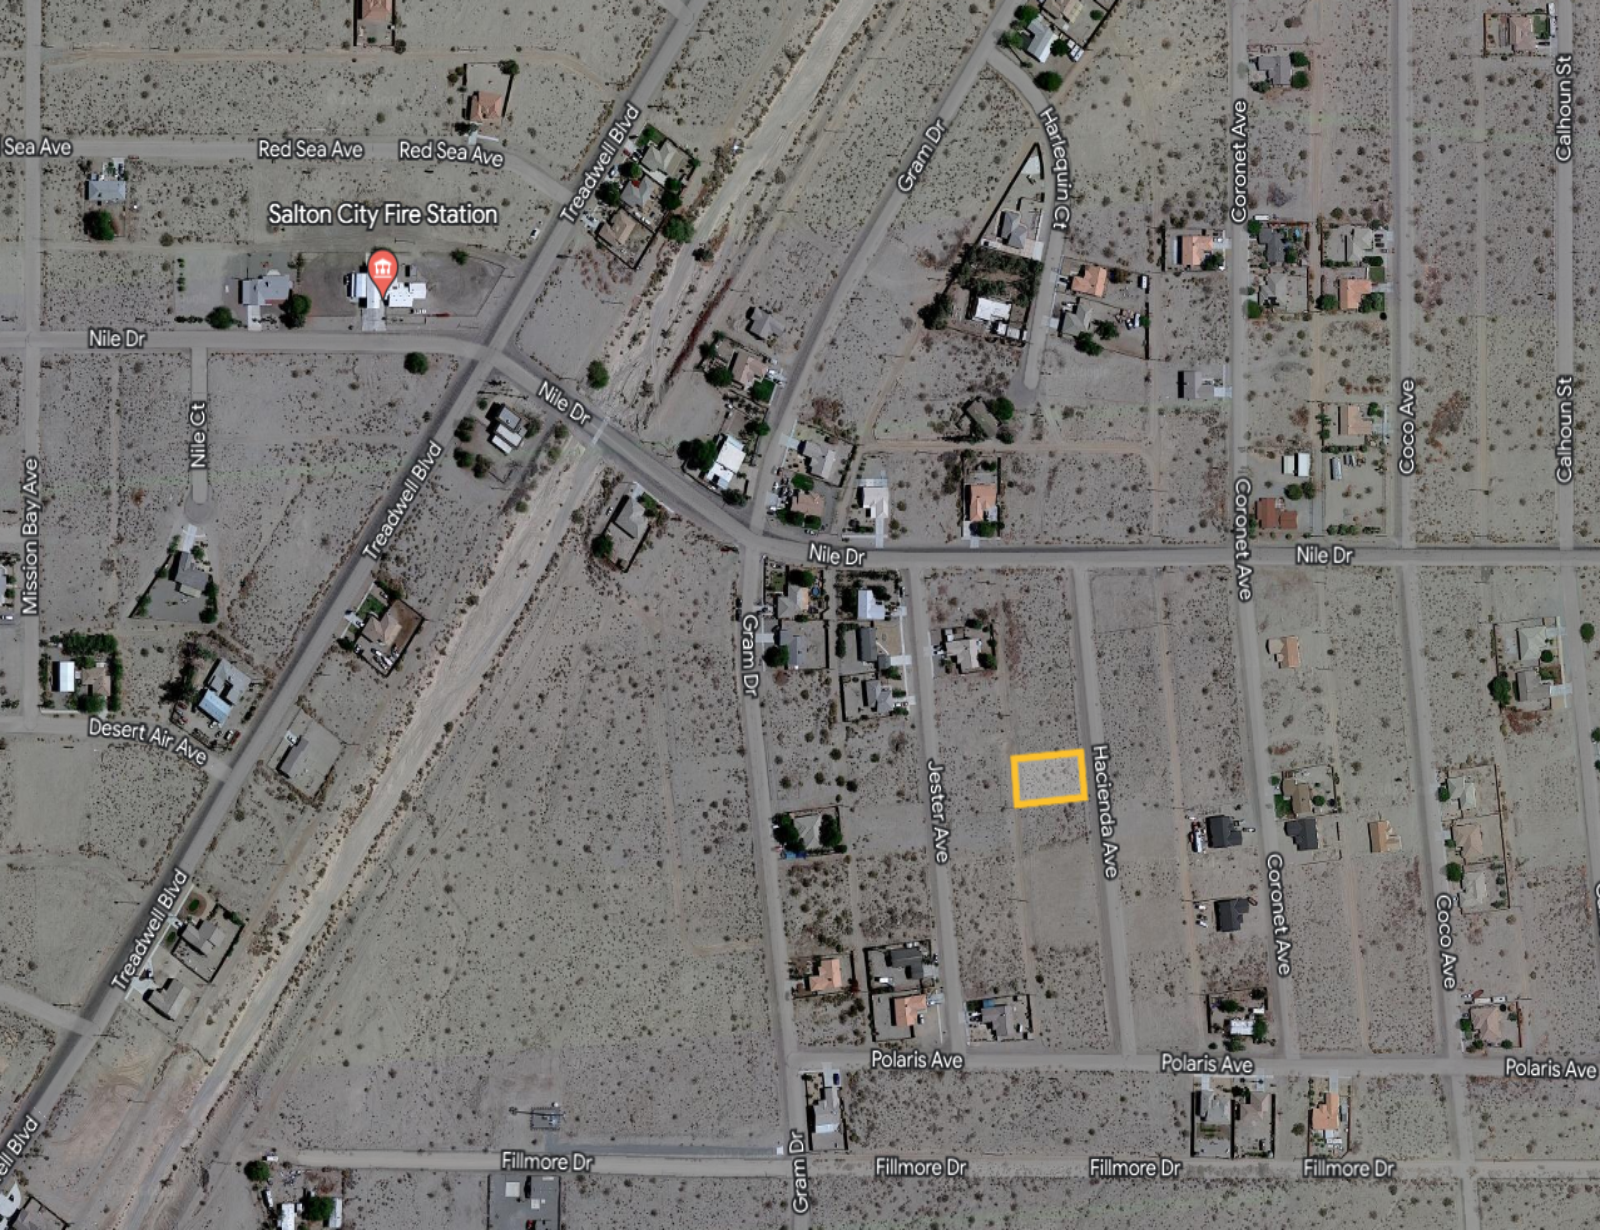 *NEW* RESIDENTIAL LOT IN  VISTA DEL MAR CLOSE TO HIGHWAY 86!! LOW MONTHLY PAYMENTS OF $225.00  2787 Hacienda Ave., Salton City, CA 92275 APN: 007-613-016-000 - Get Land Today